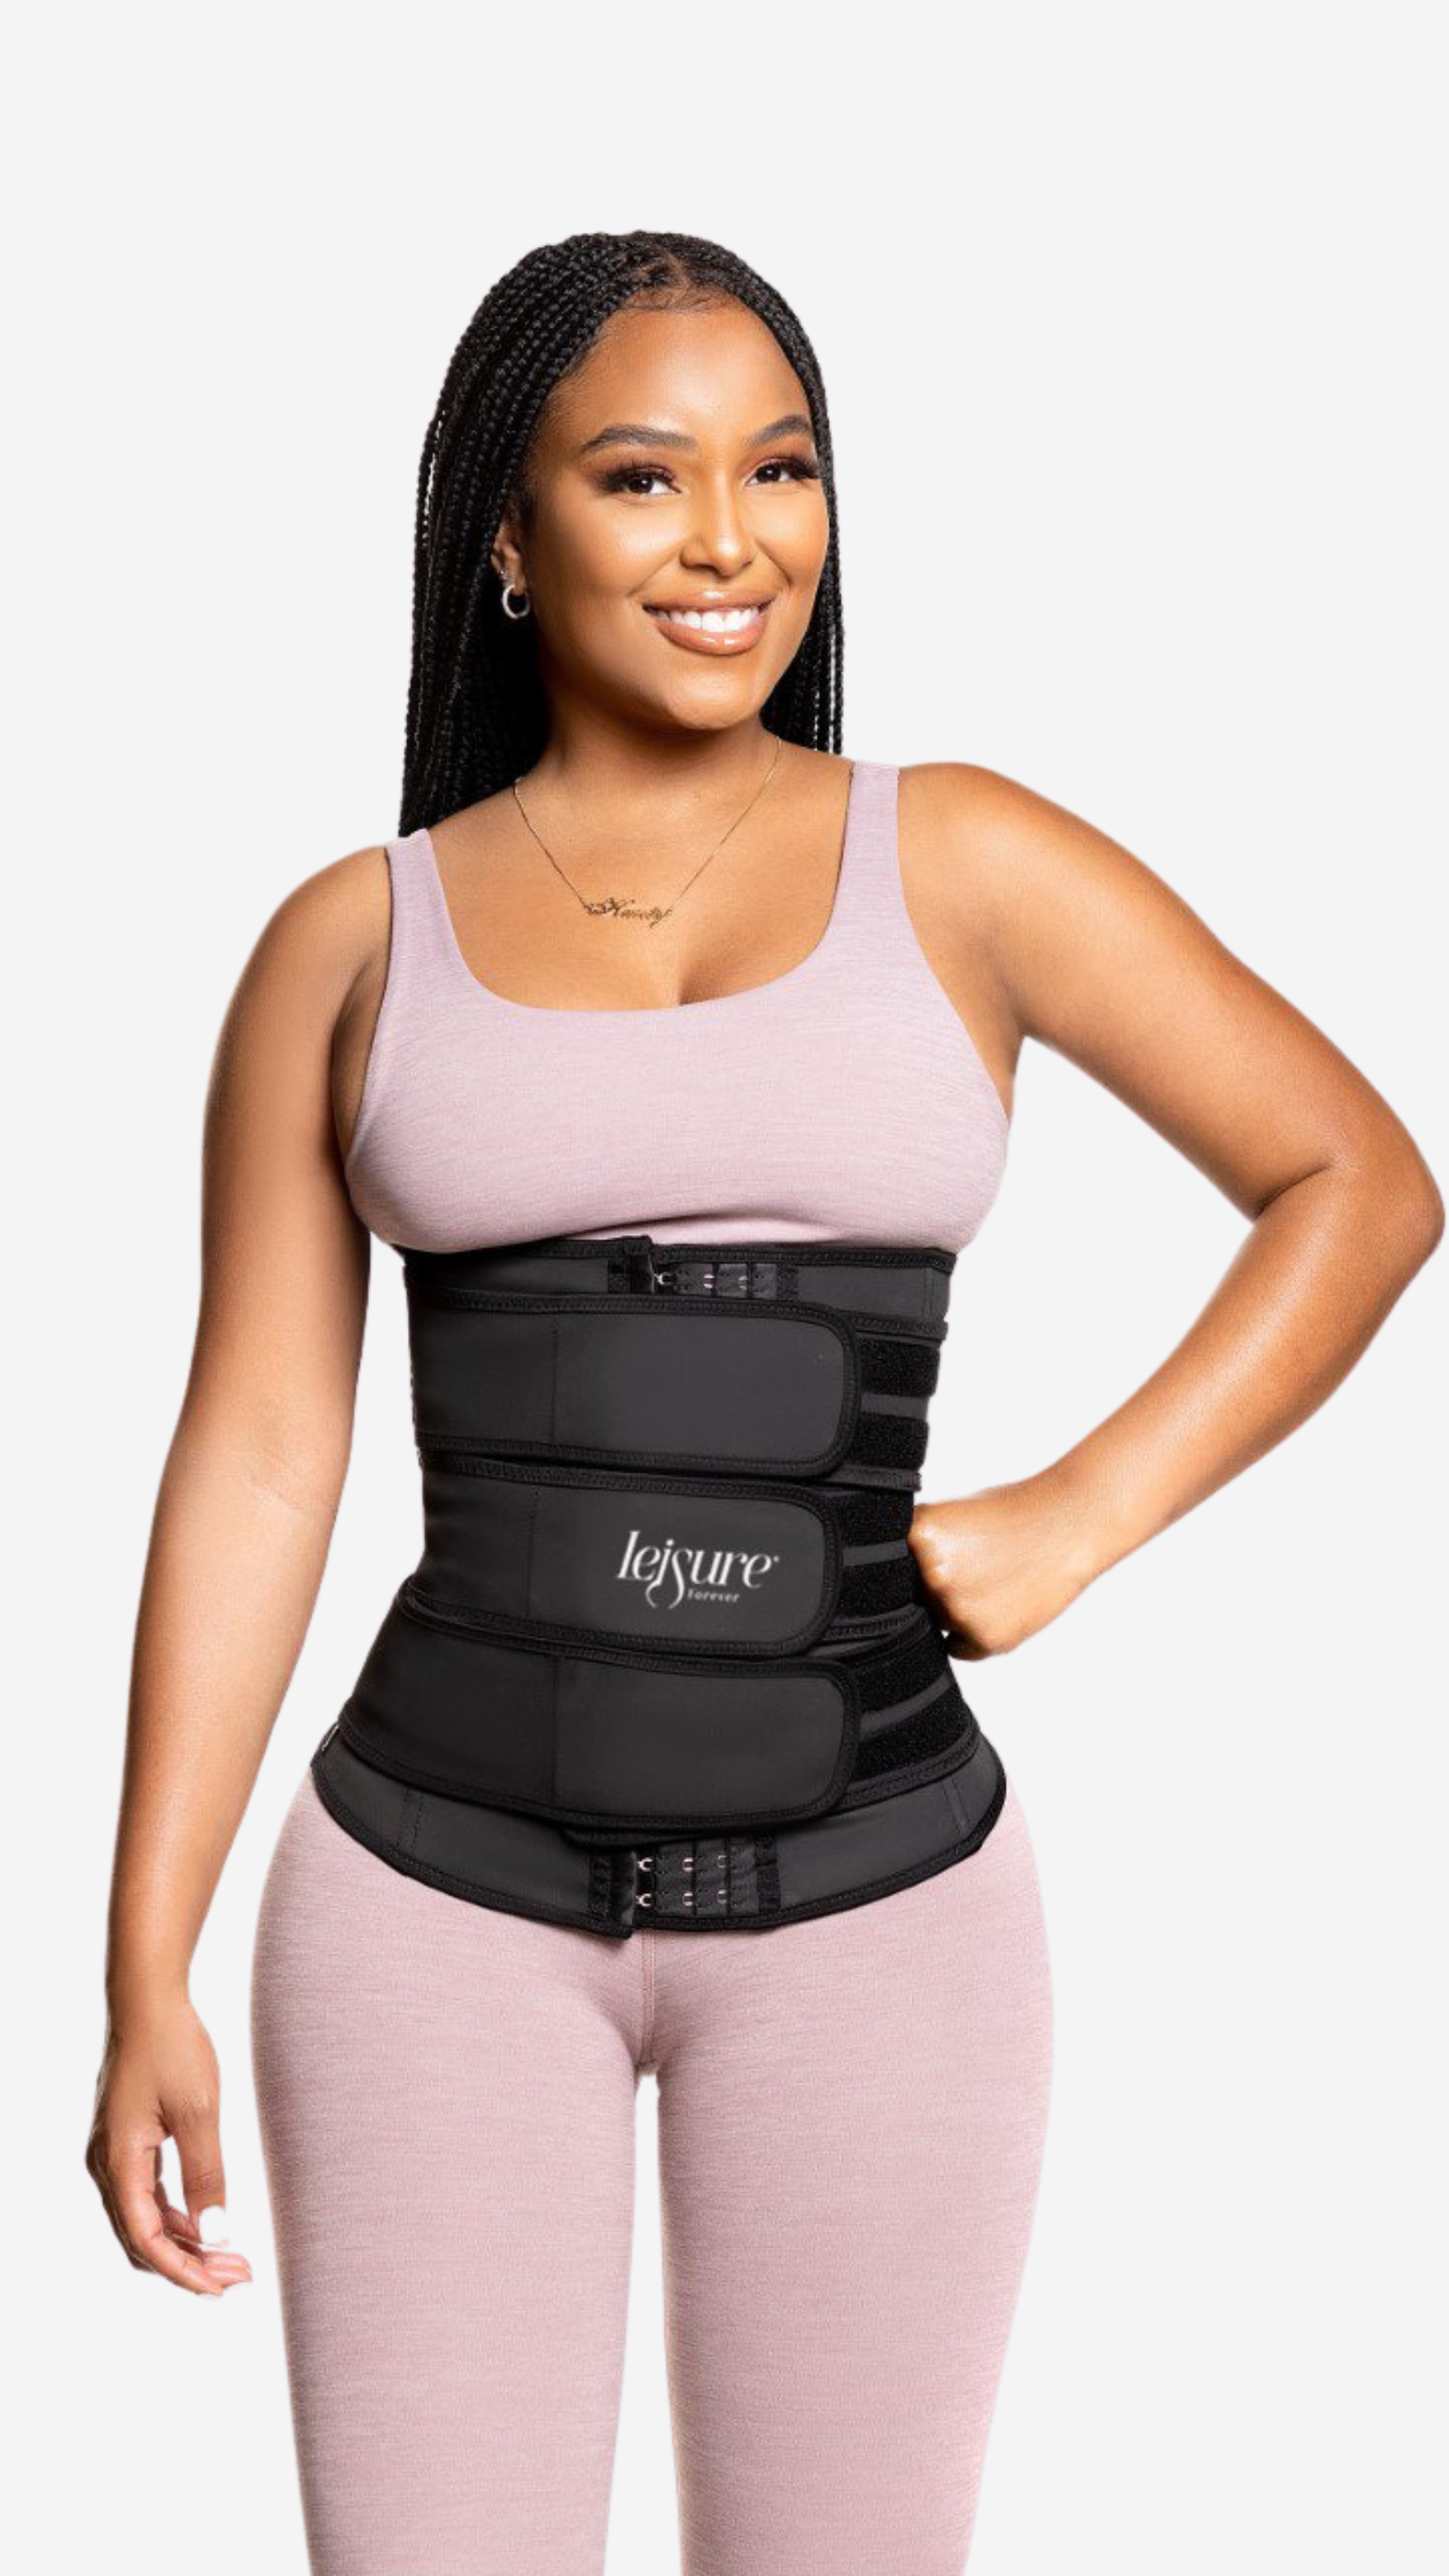 The Best Waist Trainer on the market - Leisure Forever